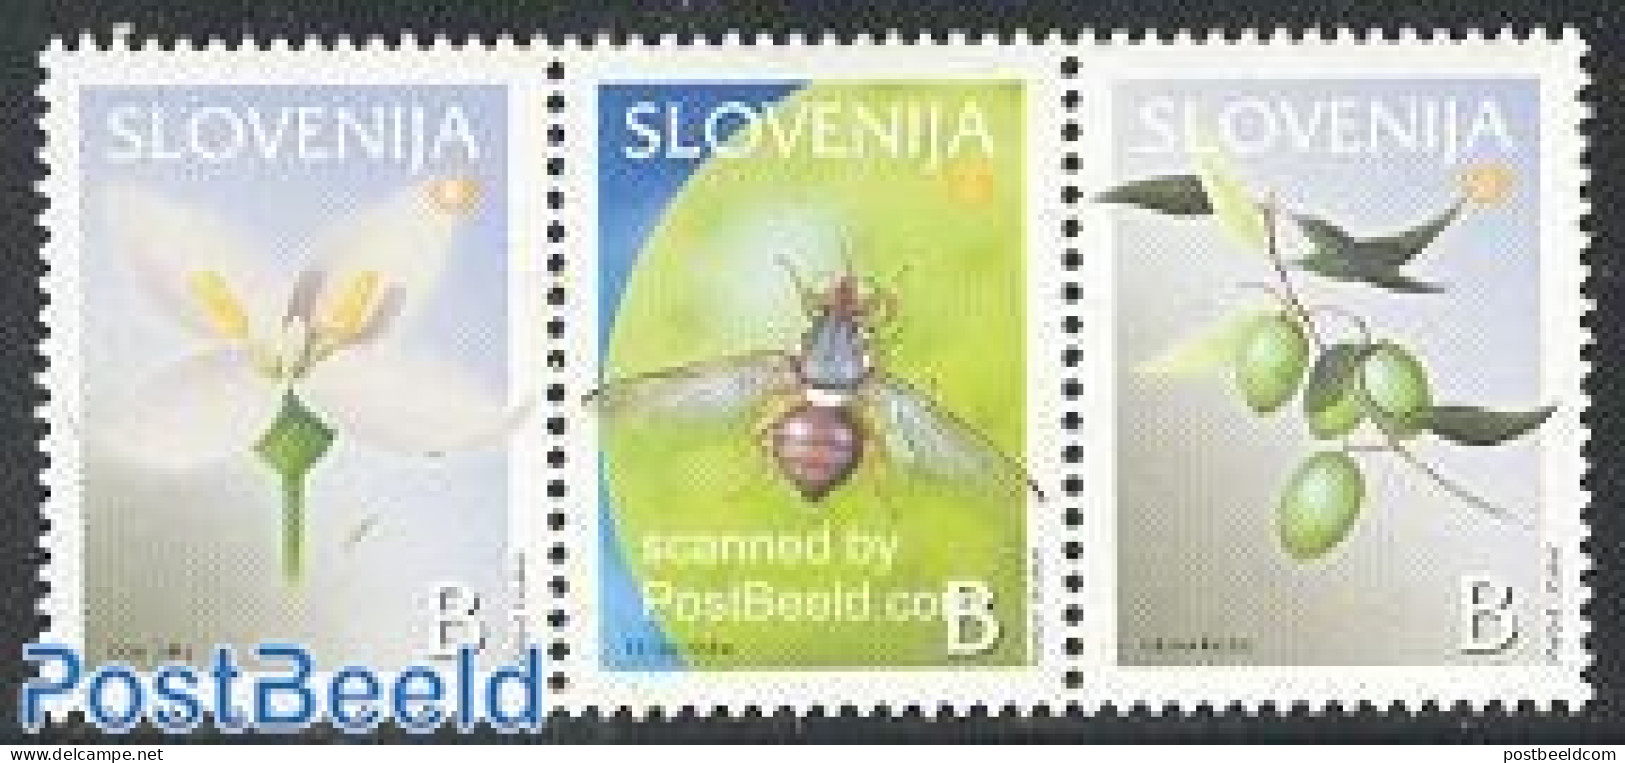 Slovenia 2003 Flora/fauna 3v [::], Mint NH, Nature - Flowers & Plants - Fruit - Insects - Fruit